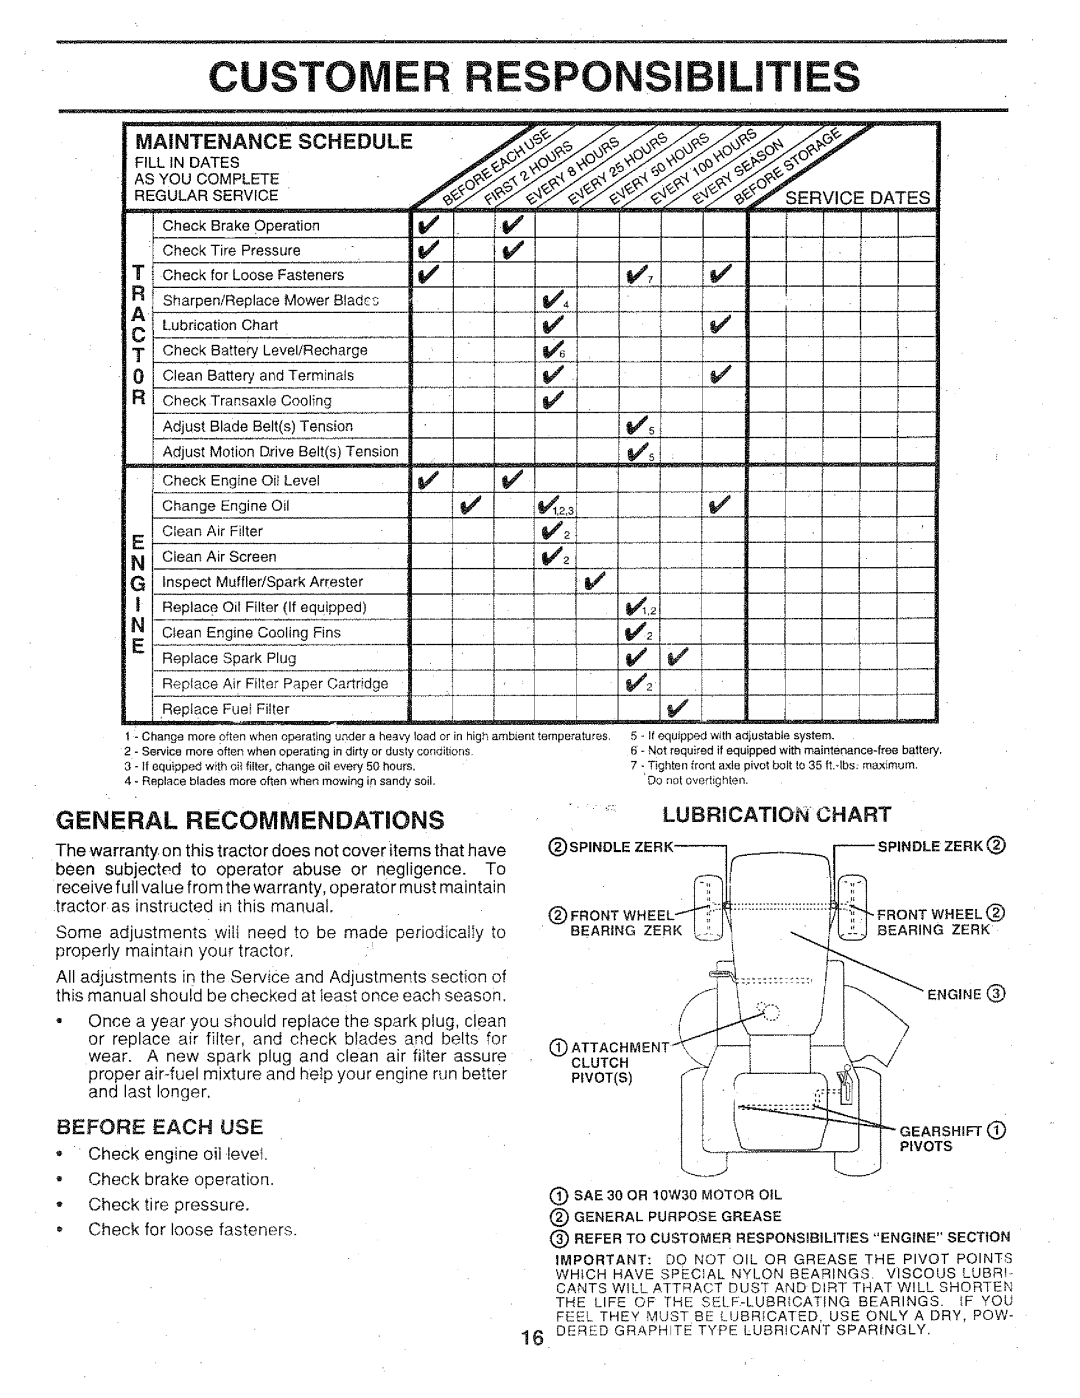 Sears 917.25147 owner manual Customer Responsibilities, General Recommendations, Schedule, Lubrication Chart, Maintenance 